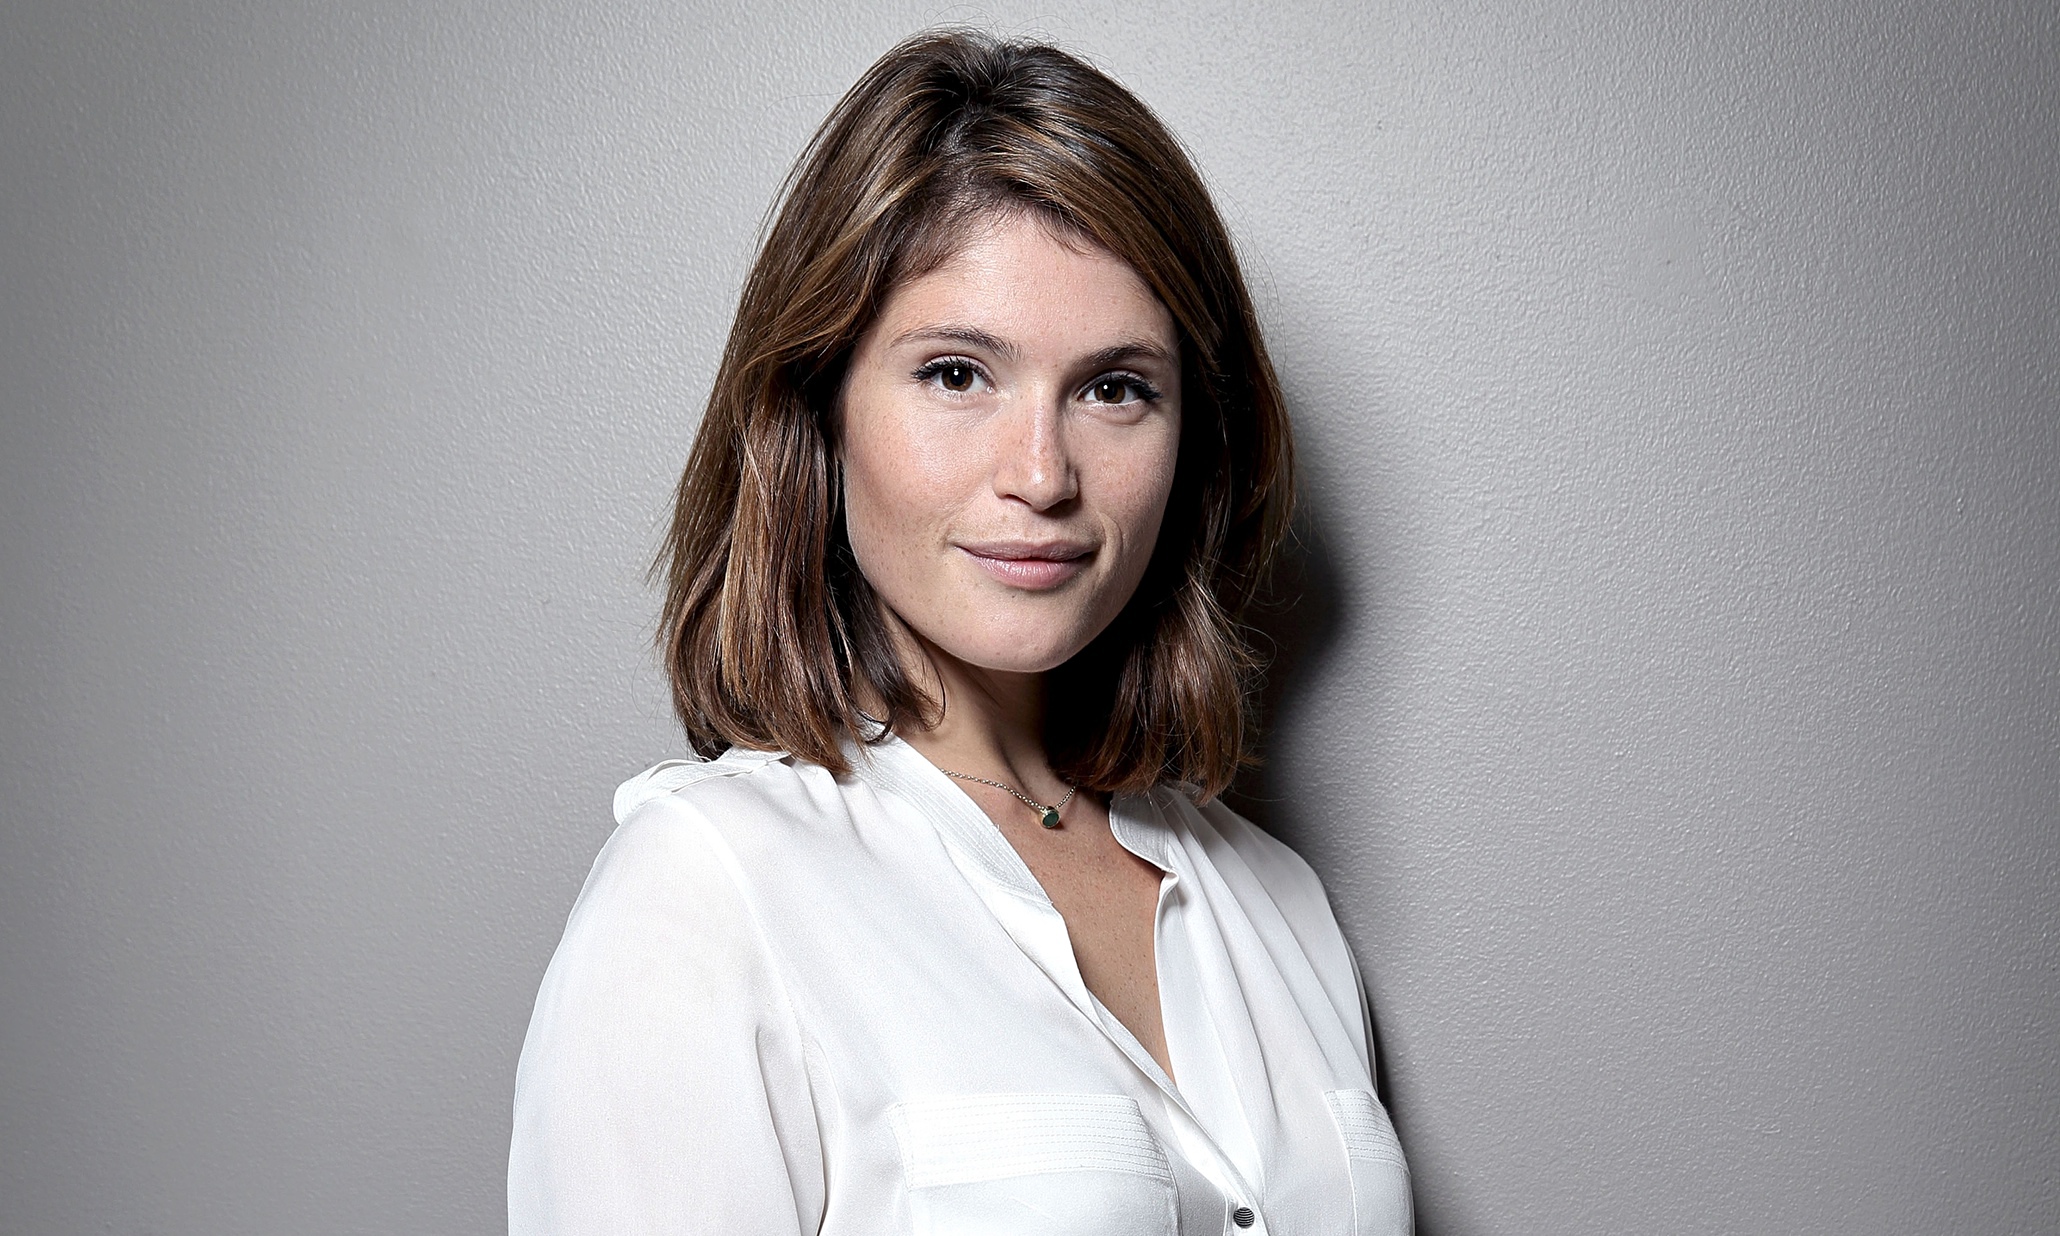 http://static.guim.co.uk/sys-images/Guardian/About/General/2015/3/4/1425477678701/QA-Gemma-Arterton-009.jpg